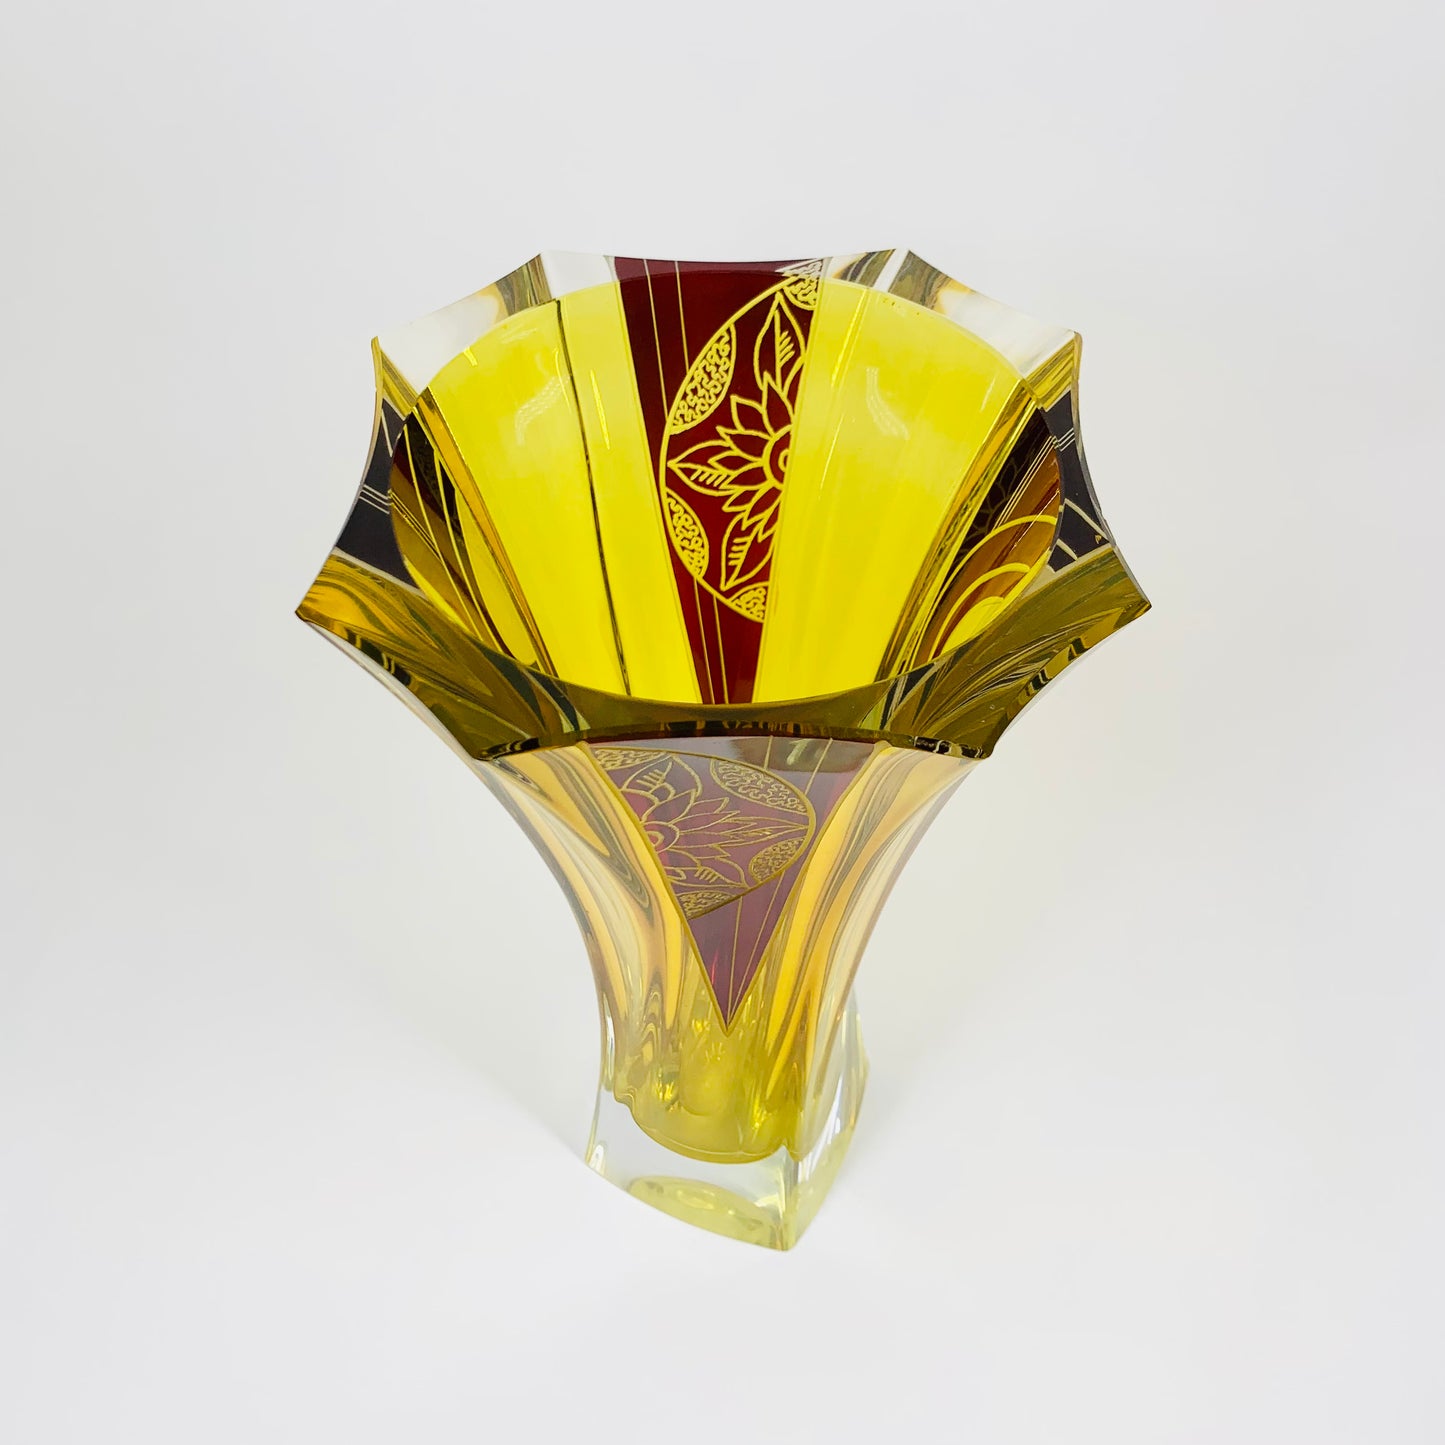 Extremely rare antique Art Deco footed spiral citrine and ruby enamel vase by Karl Palda